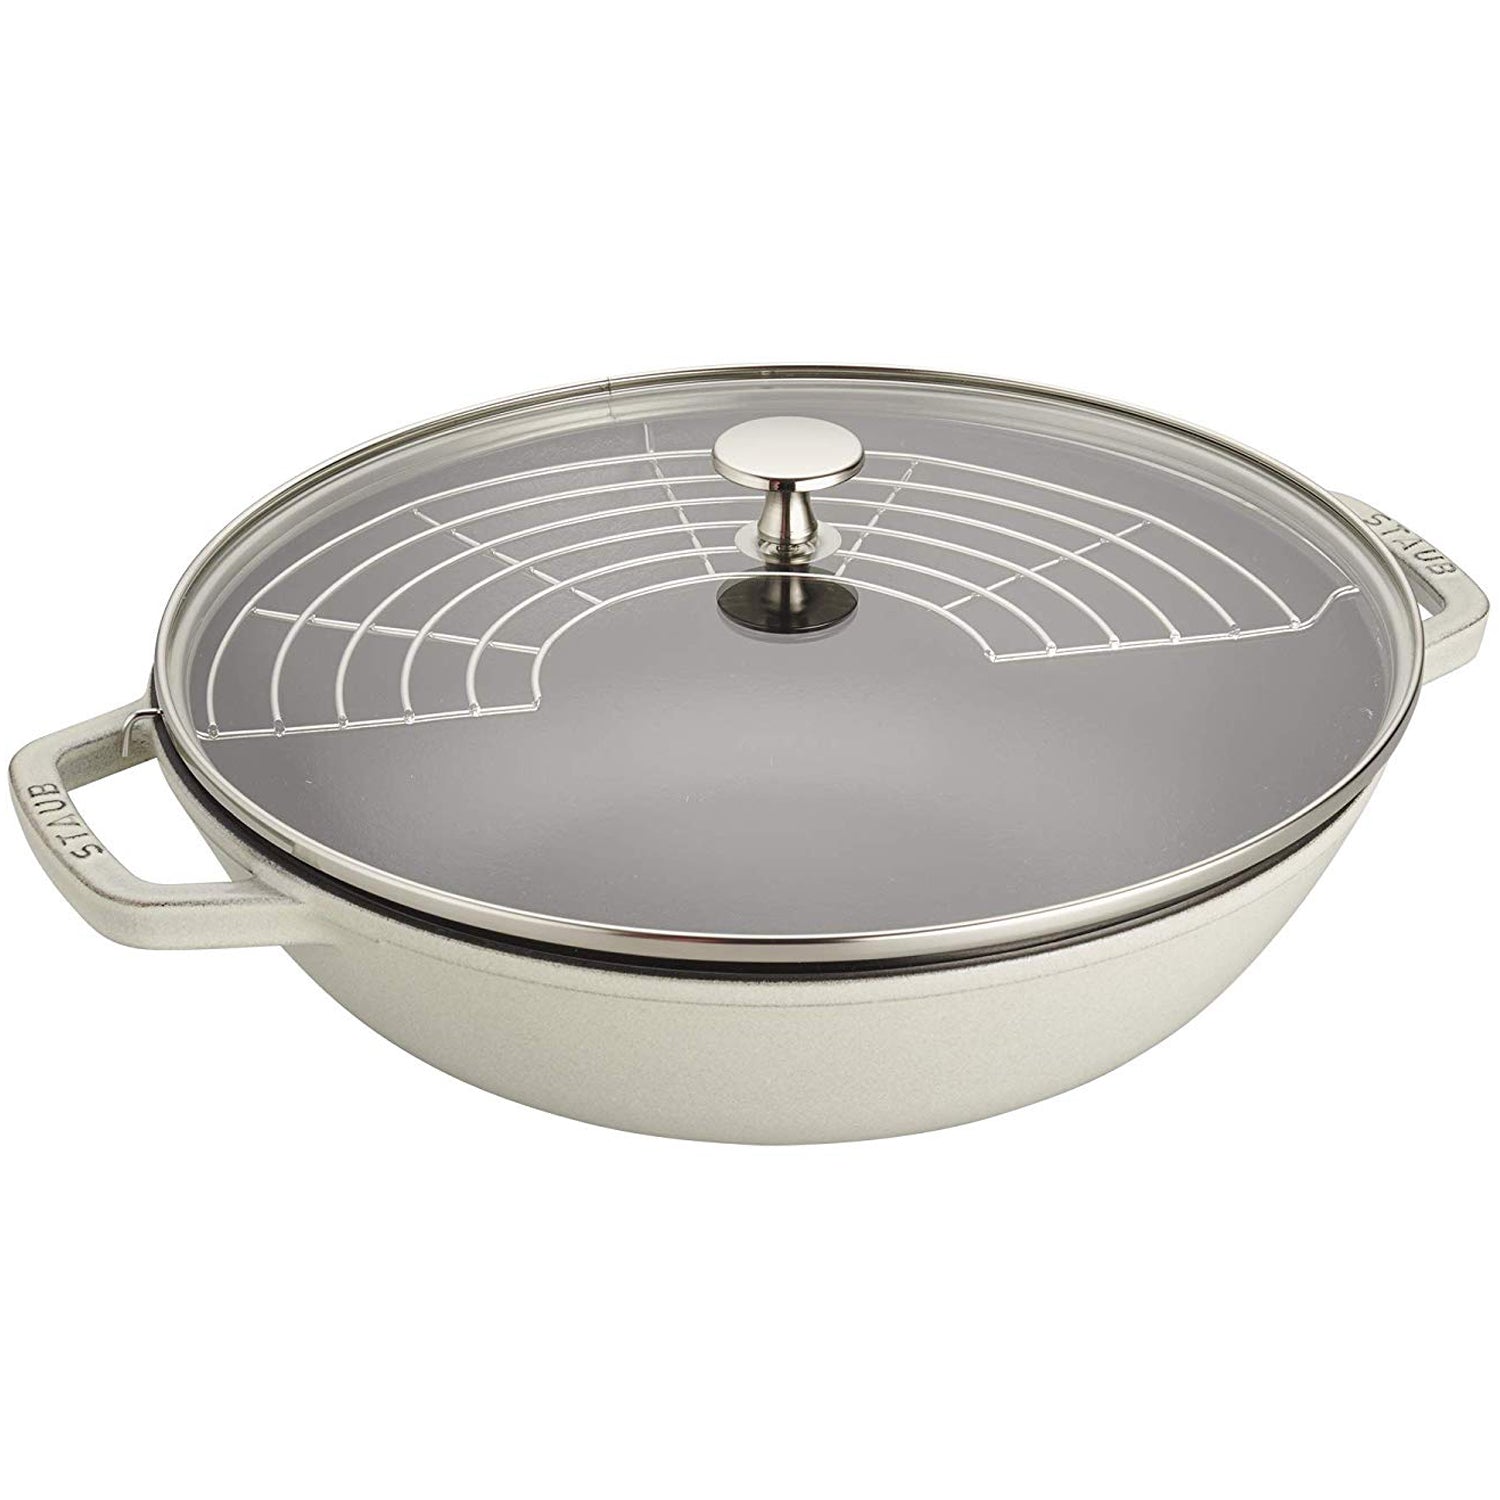 Get to Know the Staub Perfect Pan